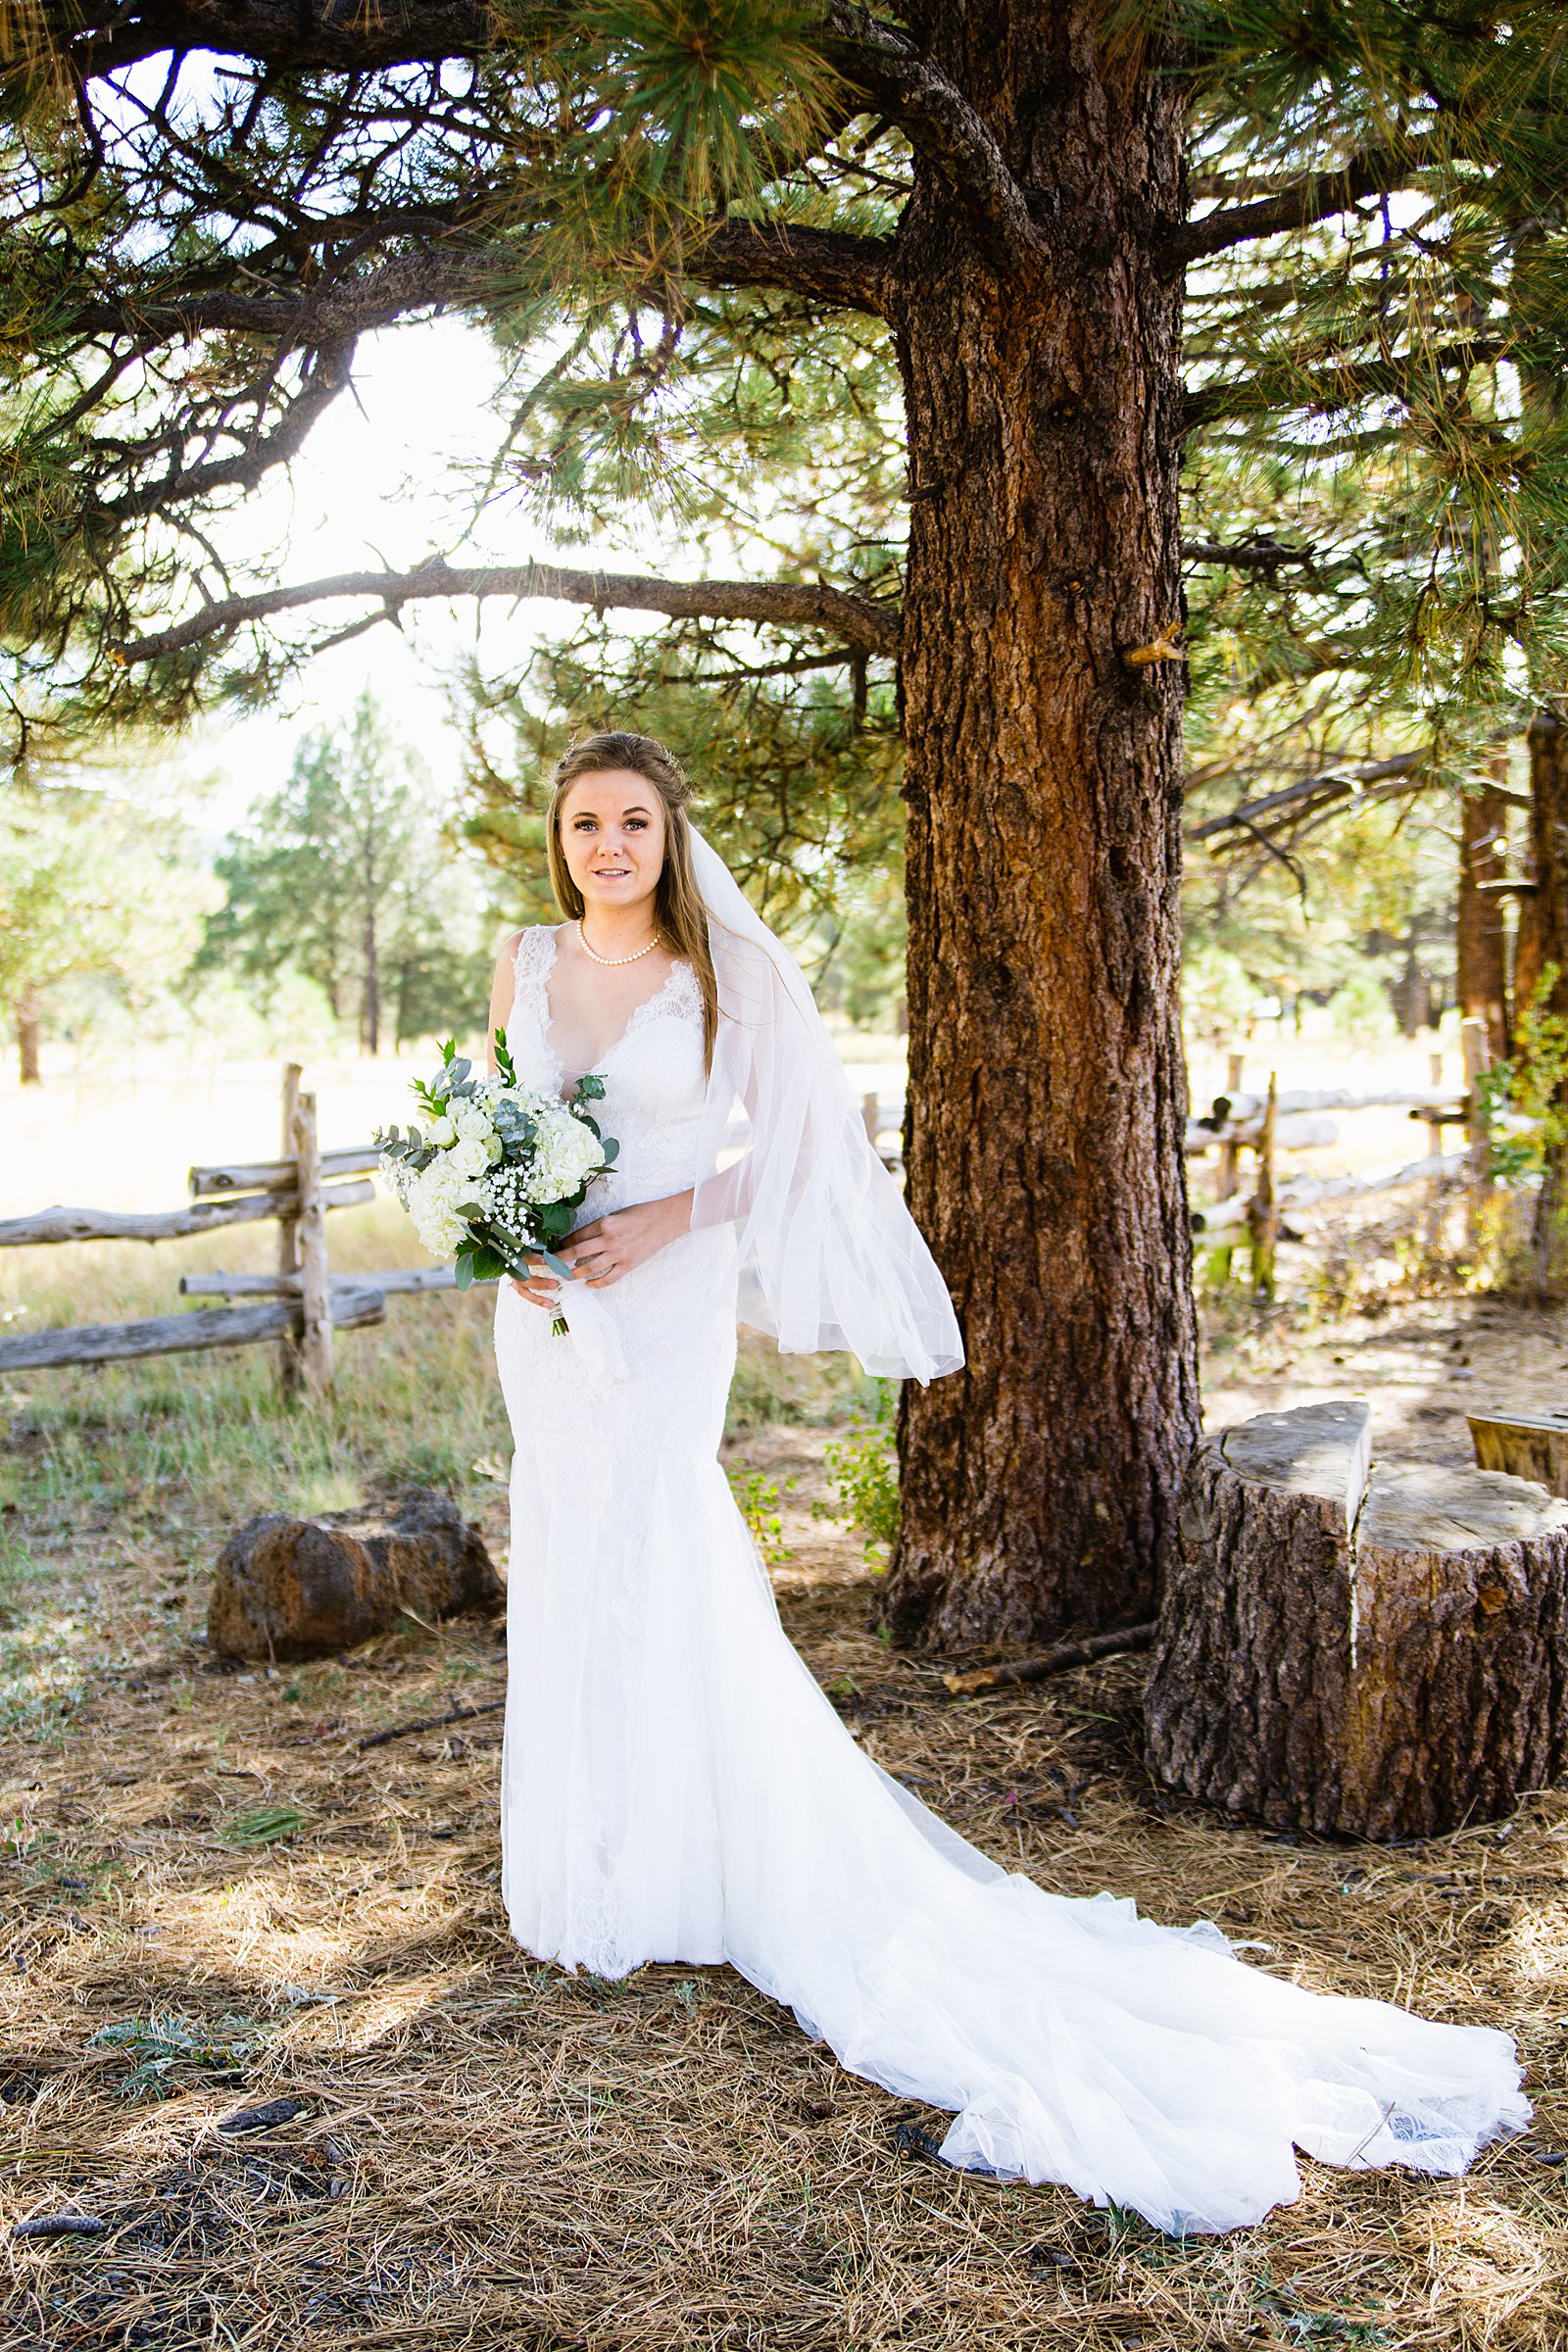 Bride's simple, romantic wedding dress for her Chapel of the Holy Dove wedding by PMA Photography.